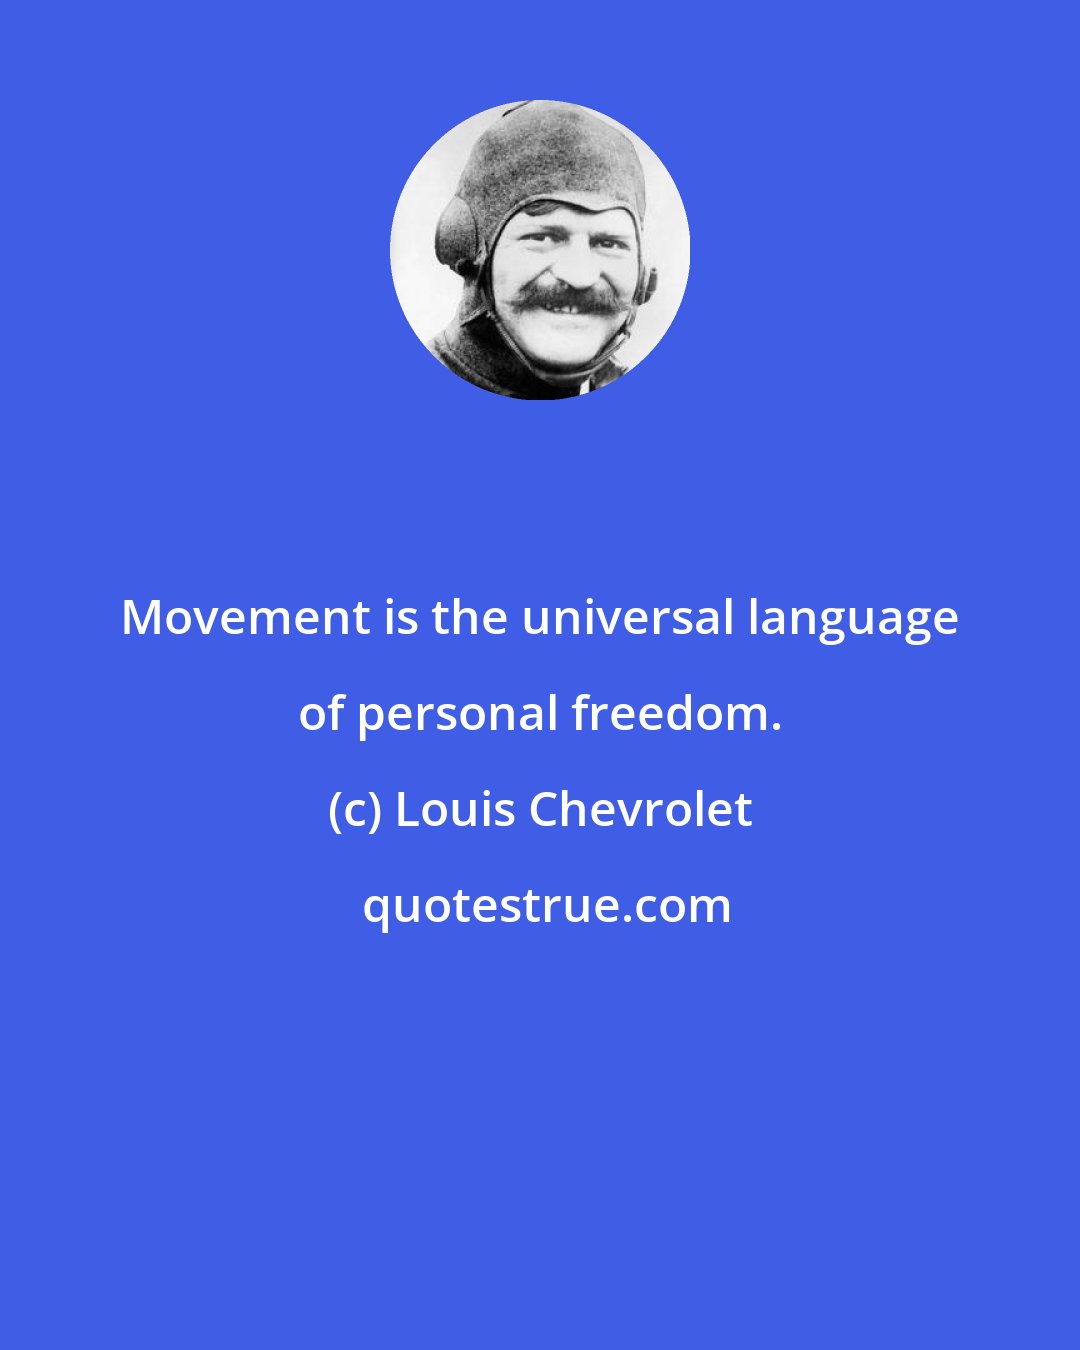 Louis Chevrolet: Movement is the universal language of personal freedom.